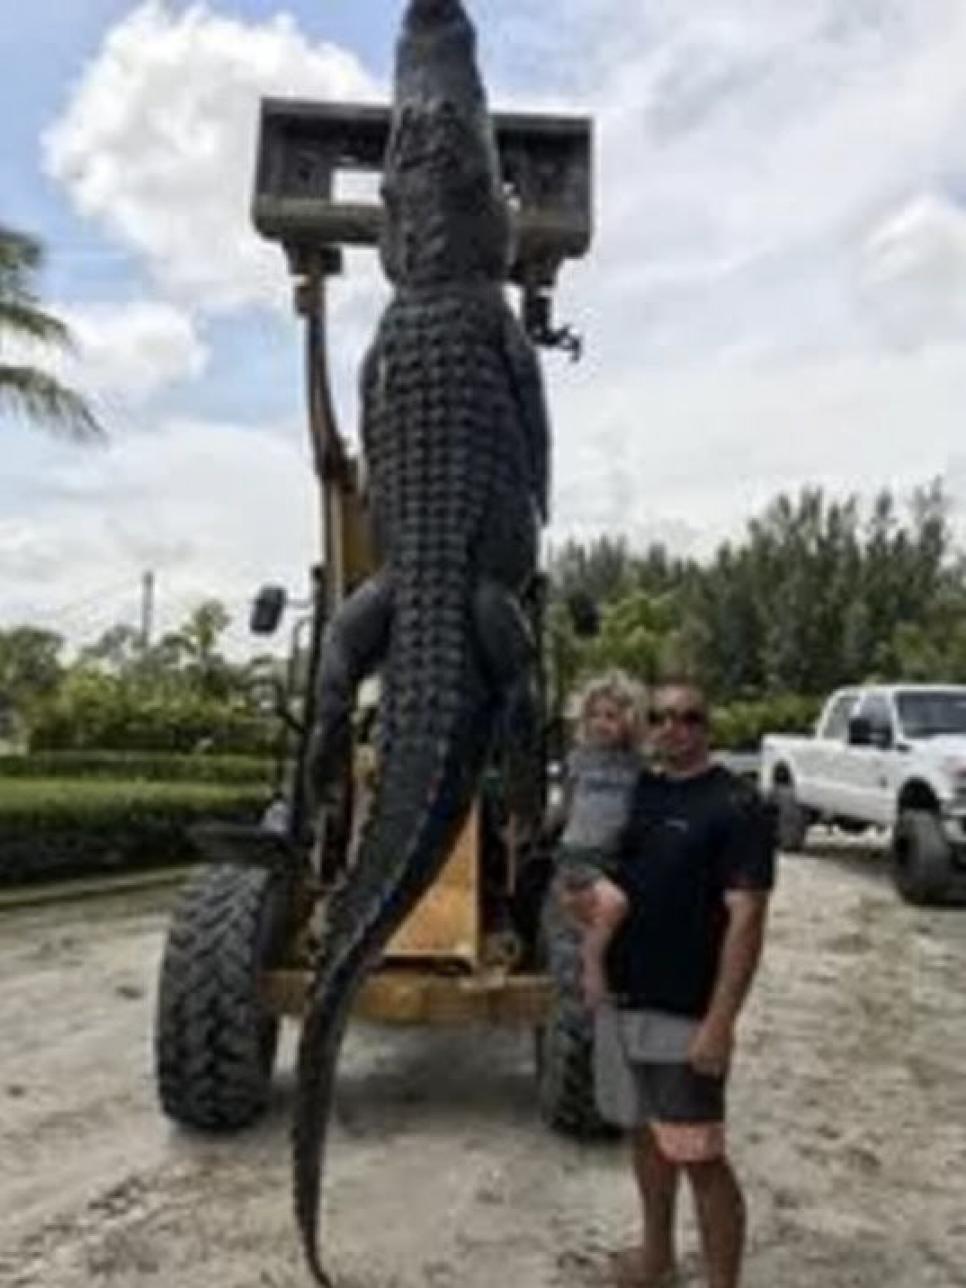 The photos of this giant gator that was caught in Florida are amazing